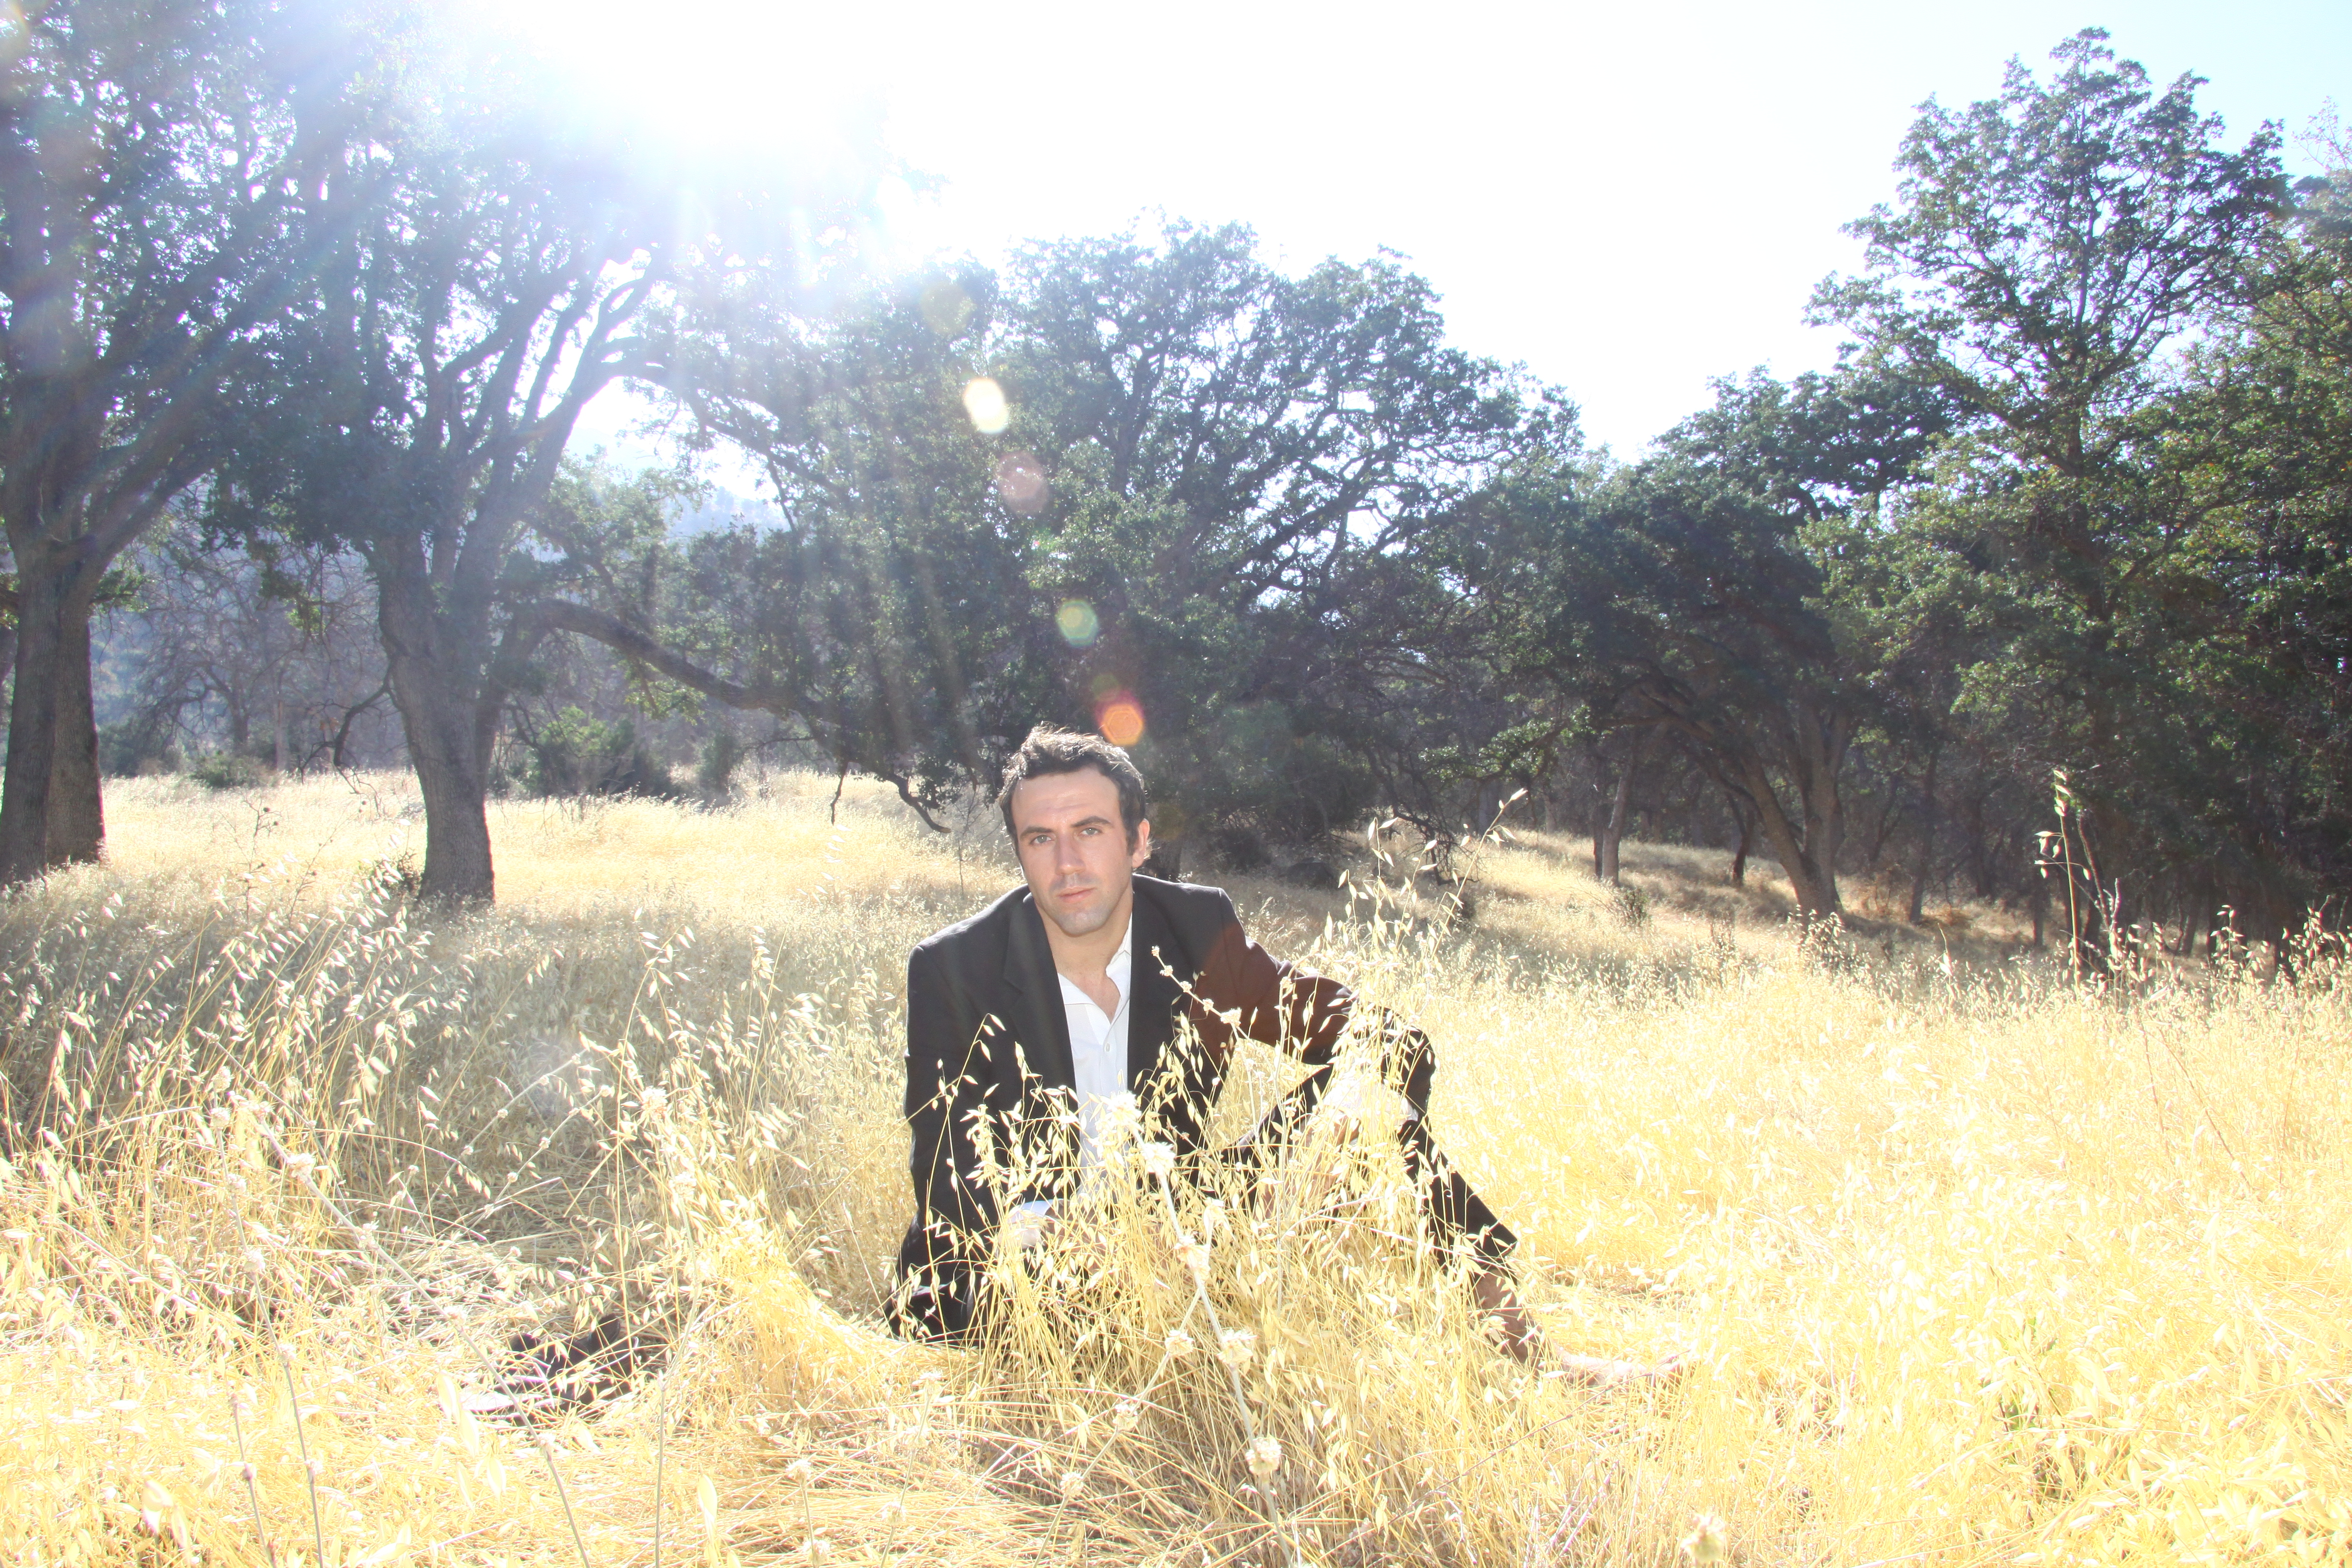 Actor Daniel Van Thomas photographed in the Los Angeles National Forest by Joe Nivens